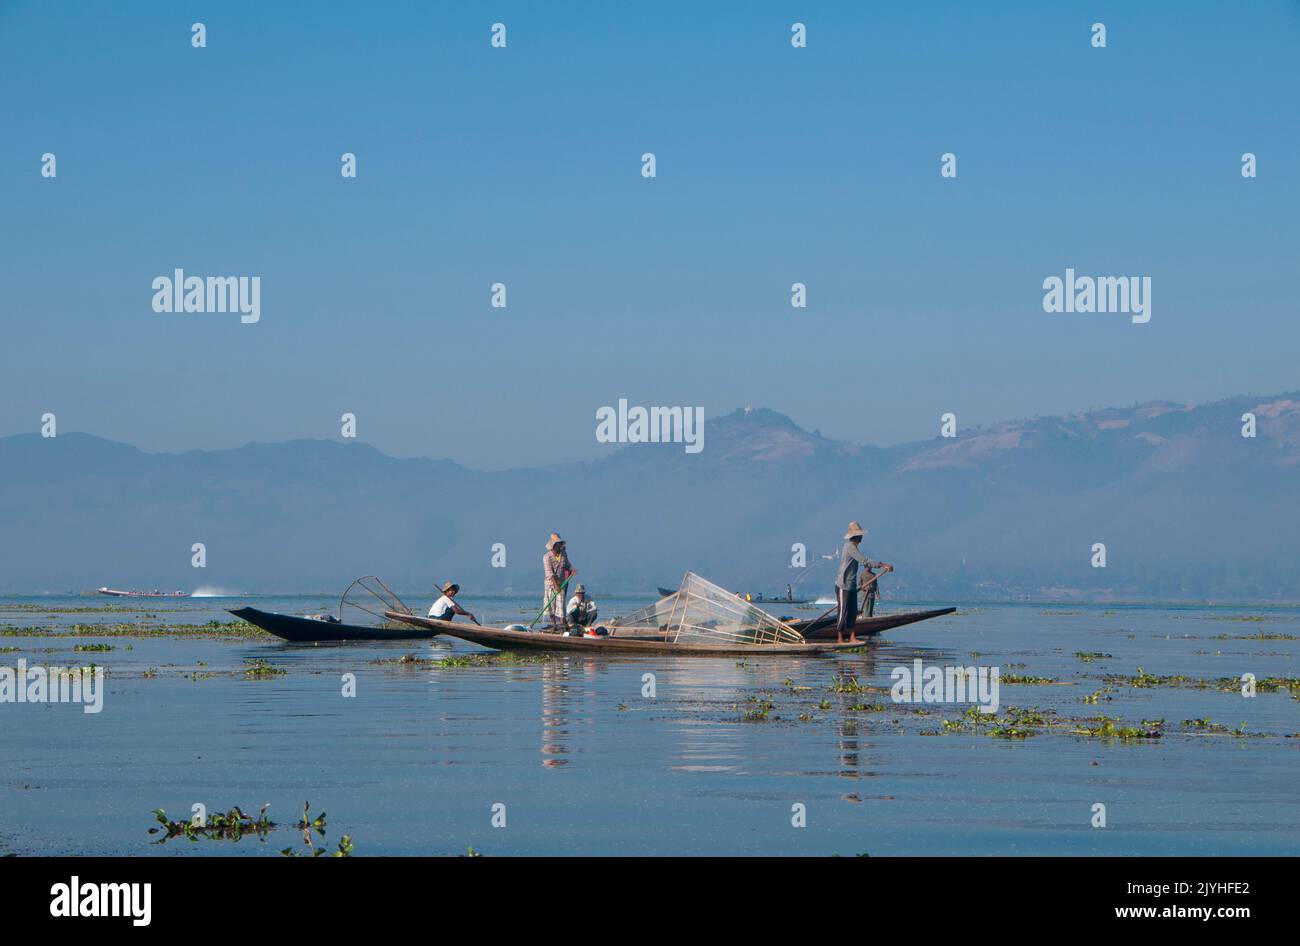 Burma / Myanmar: Leg rowing Intha fishermen on Inle Lake, Shan State. Inle Lake is a freshwater lake located in Shan State. It is the second largest lake in Myanmar and one of the highest at an altitude of 2,900 feet (880 m). The people of Inle Lake (called Intha), some 70,000 of them, live in four towns bordering the lake, in numerous small villages along the lake's shores, and on the lake itself. The population consists predominantly of Intha, with a mix of other Shan, Taungyo, Pa-O (Taungthu), Danu, Kayah, Danaw and Bamar ethnicities. Stock Photo